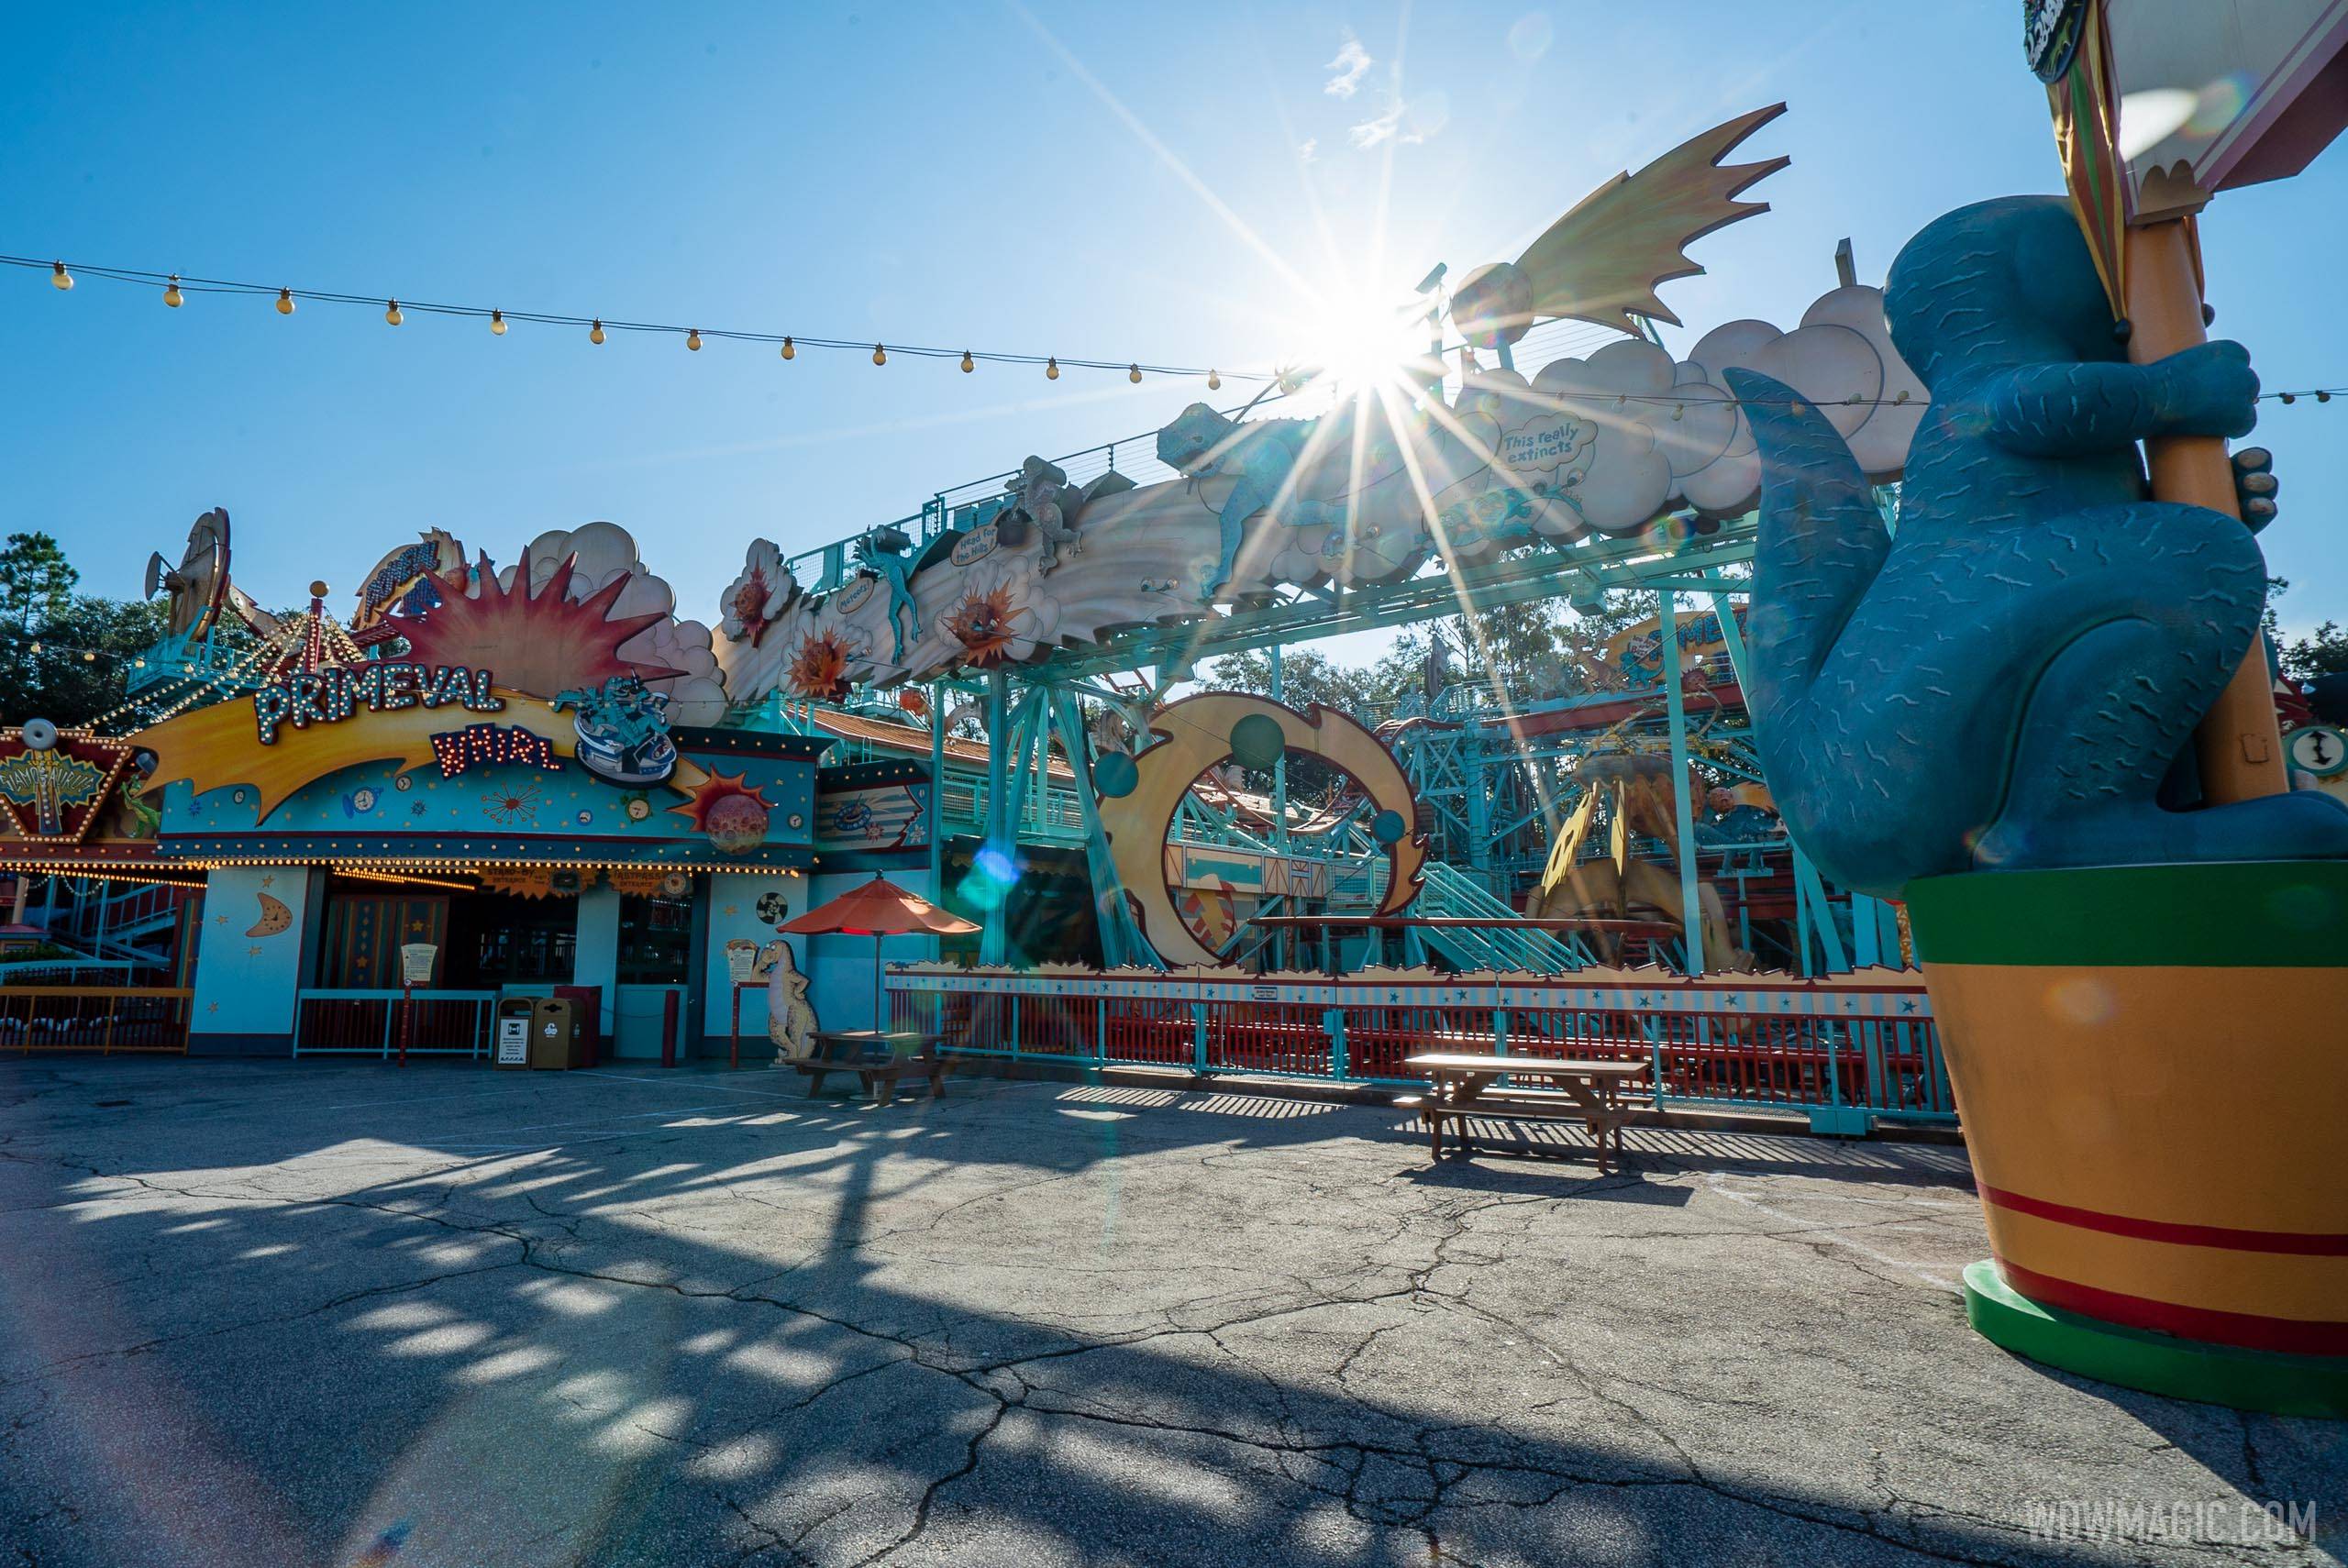 Primeval Whirl reopening during busy Thanksgiving week